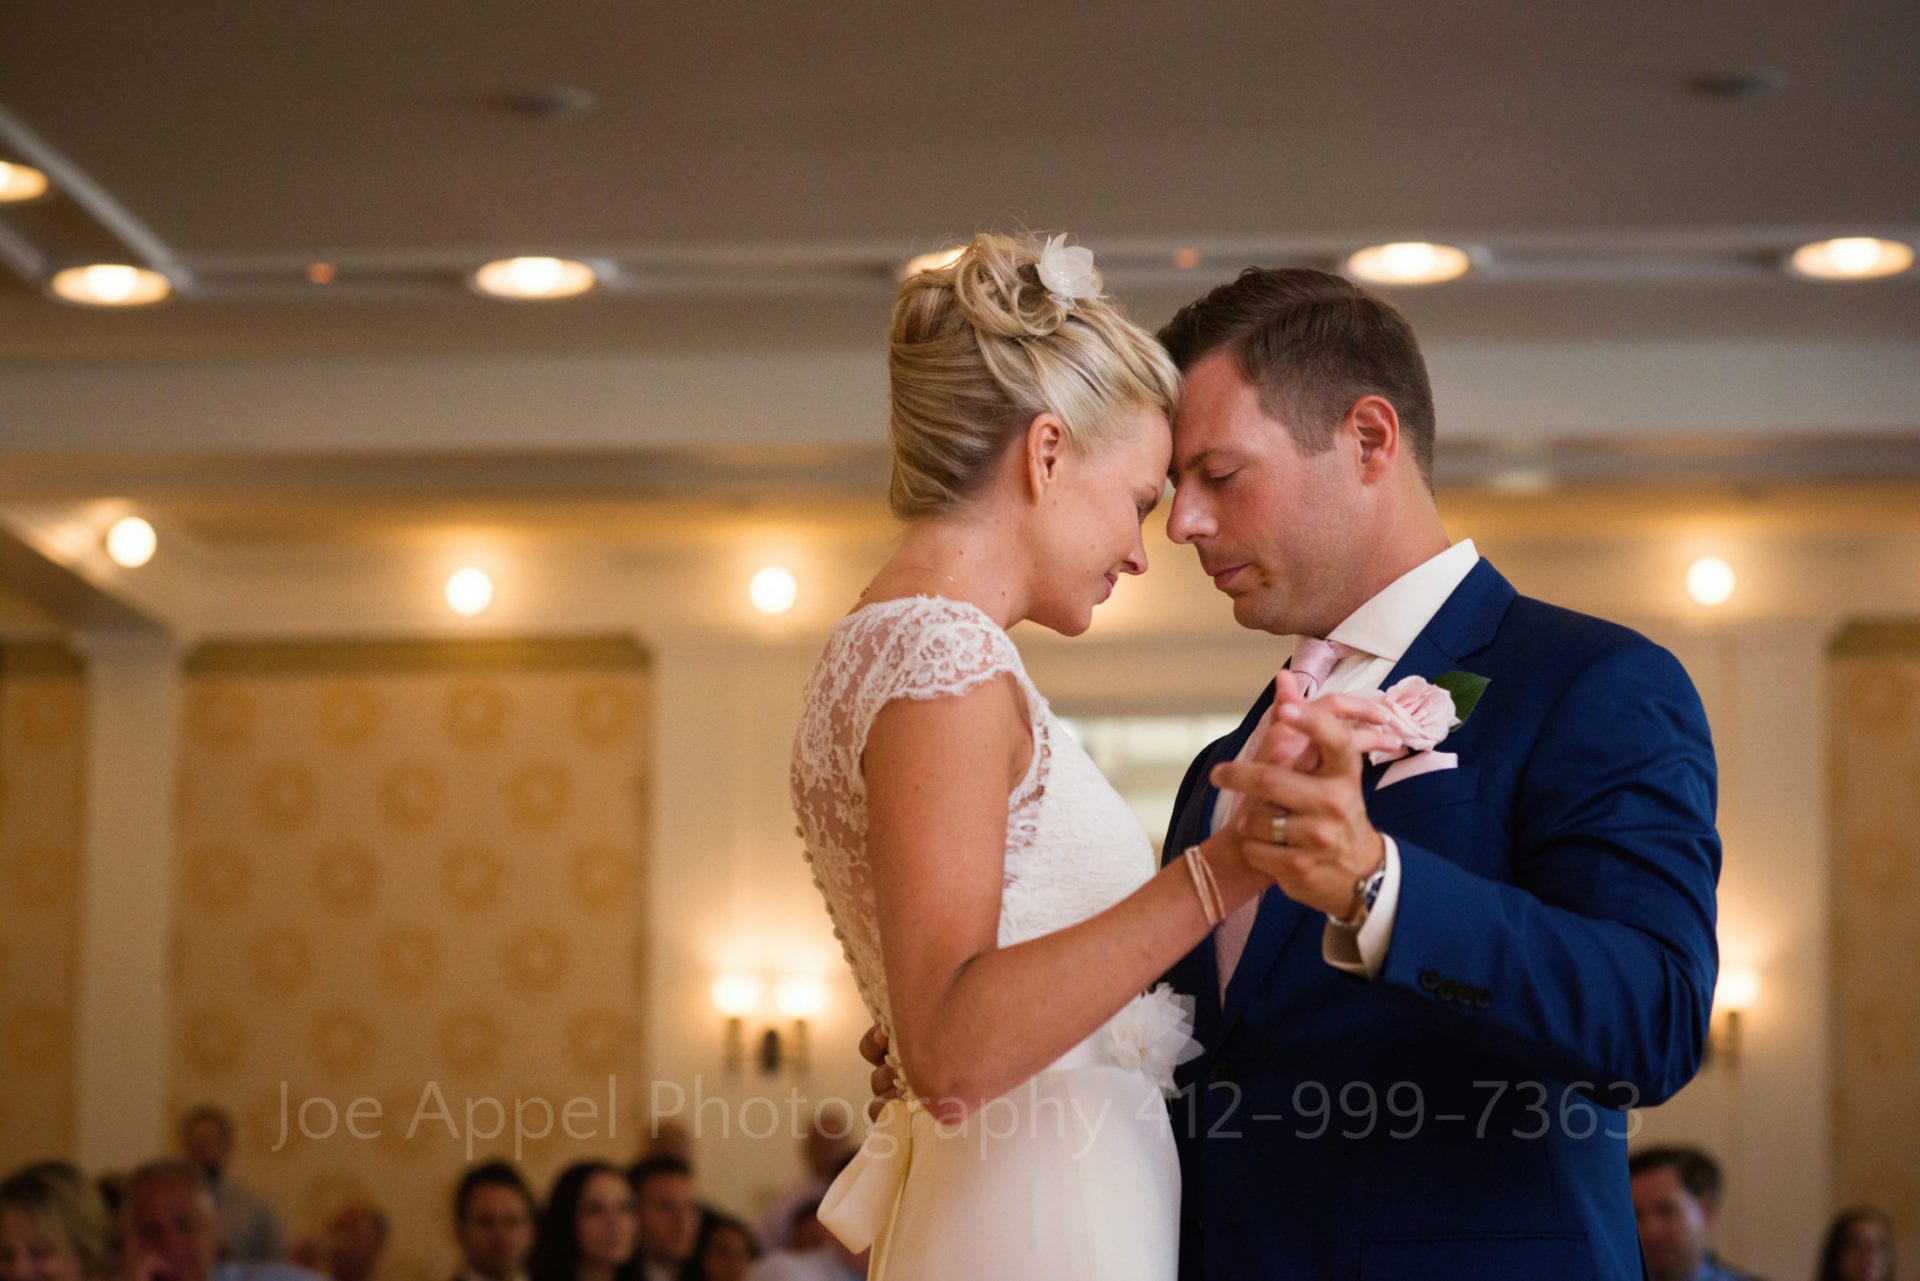 Bride and groom dance with their foreheads touching in a high ceilinged room during their Omni Bedford Springs Resort Wedding.